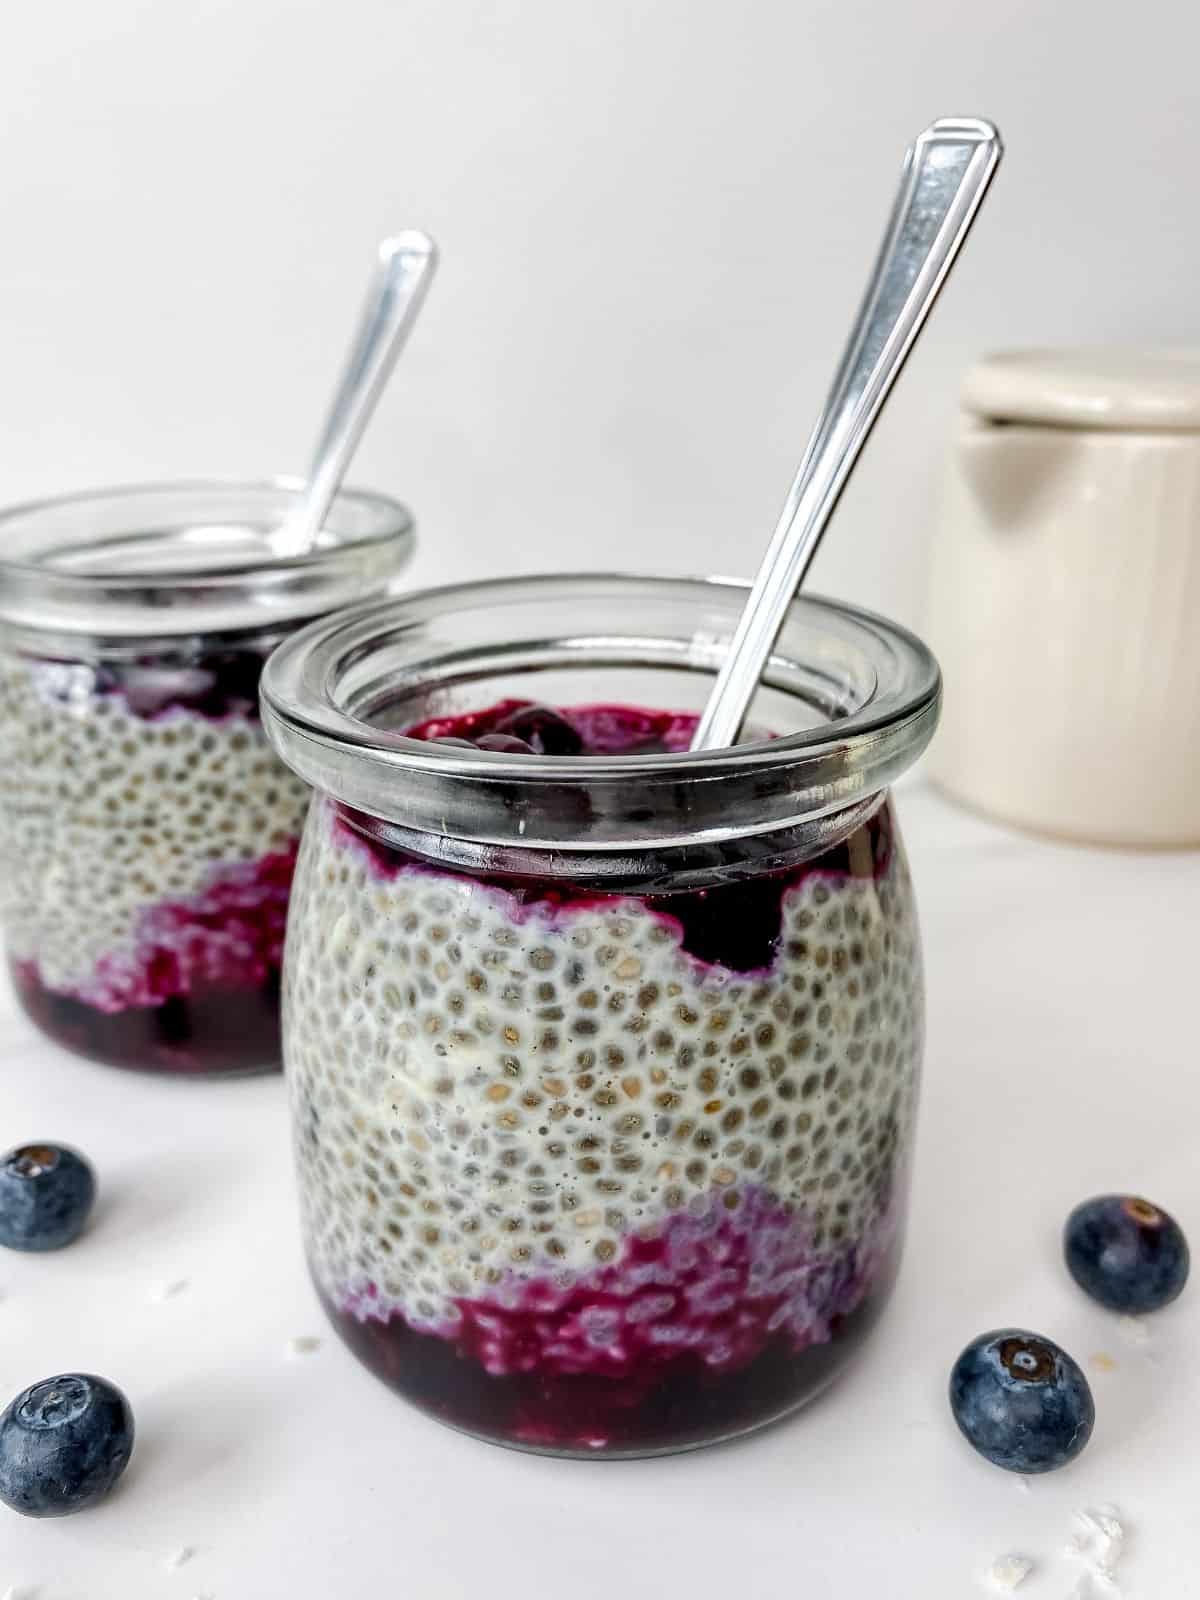 cardamom chia pudding in two glass jars with a jug in the background.